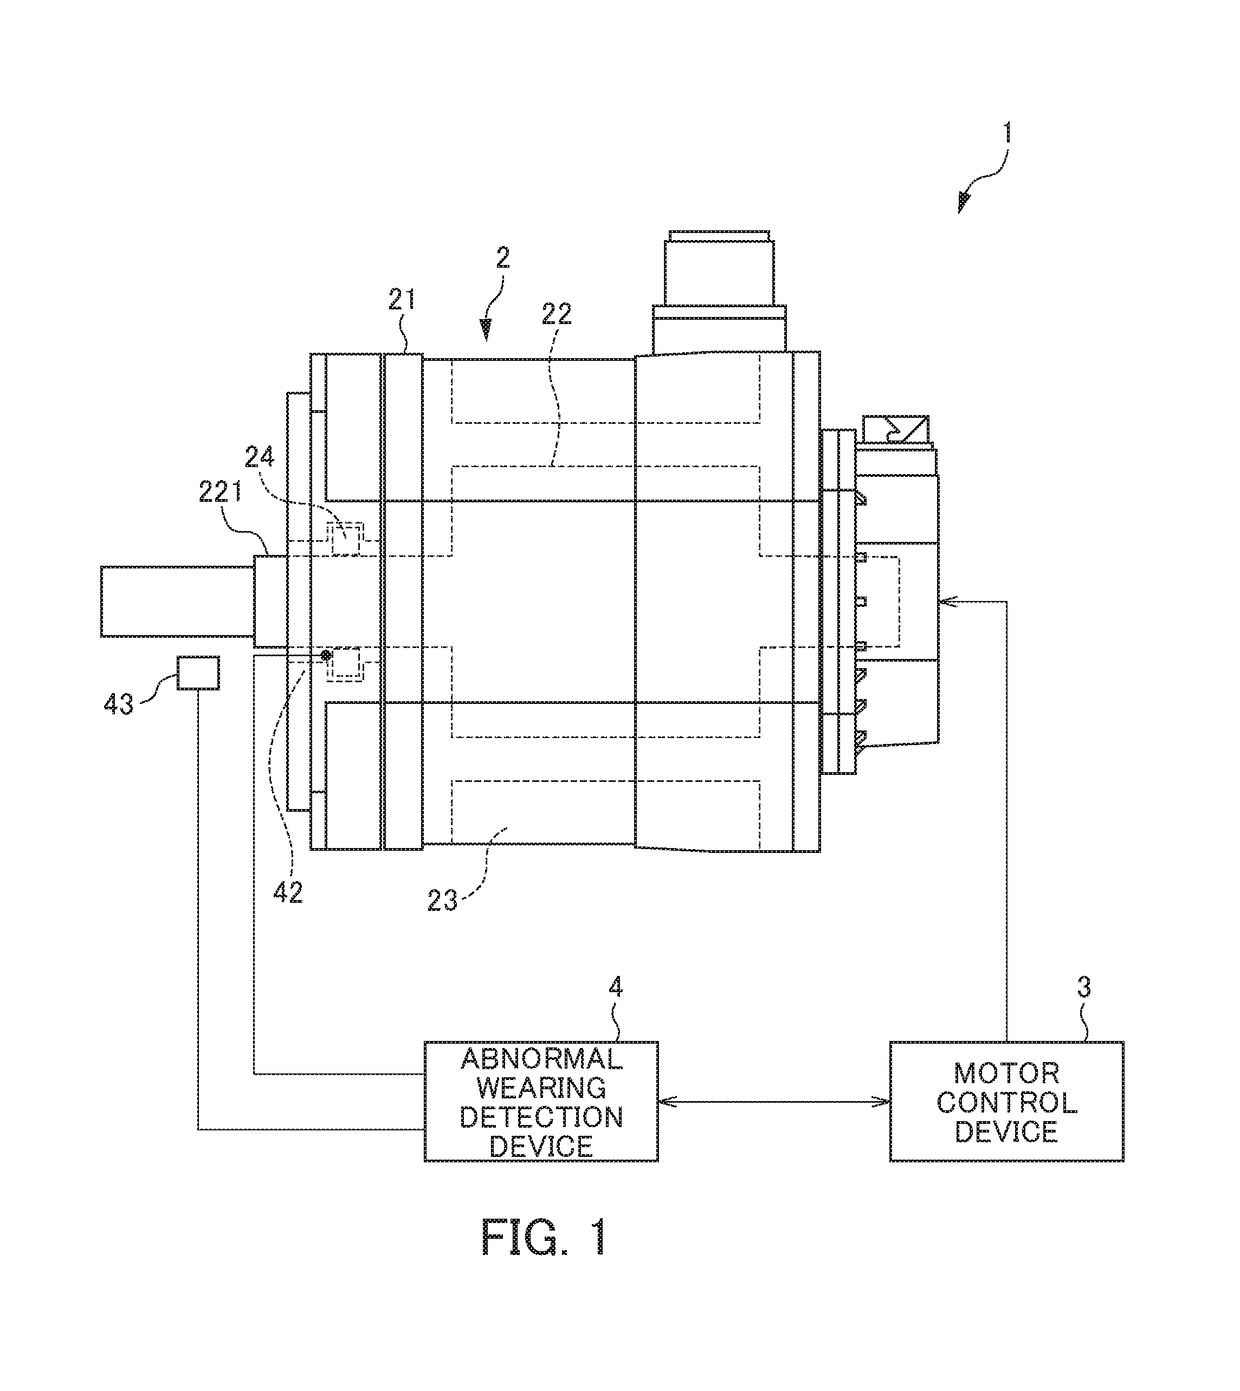 Abnormal wearing detection device for seal members and rotor device